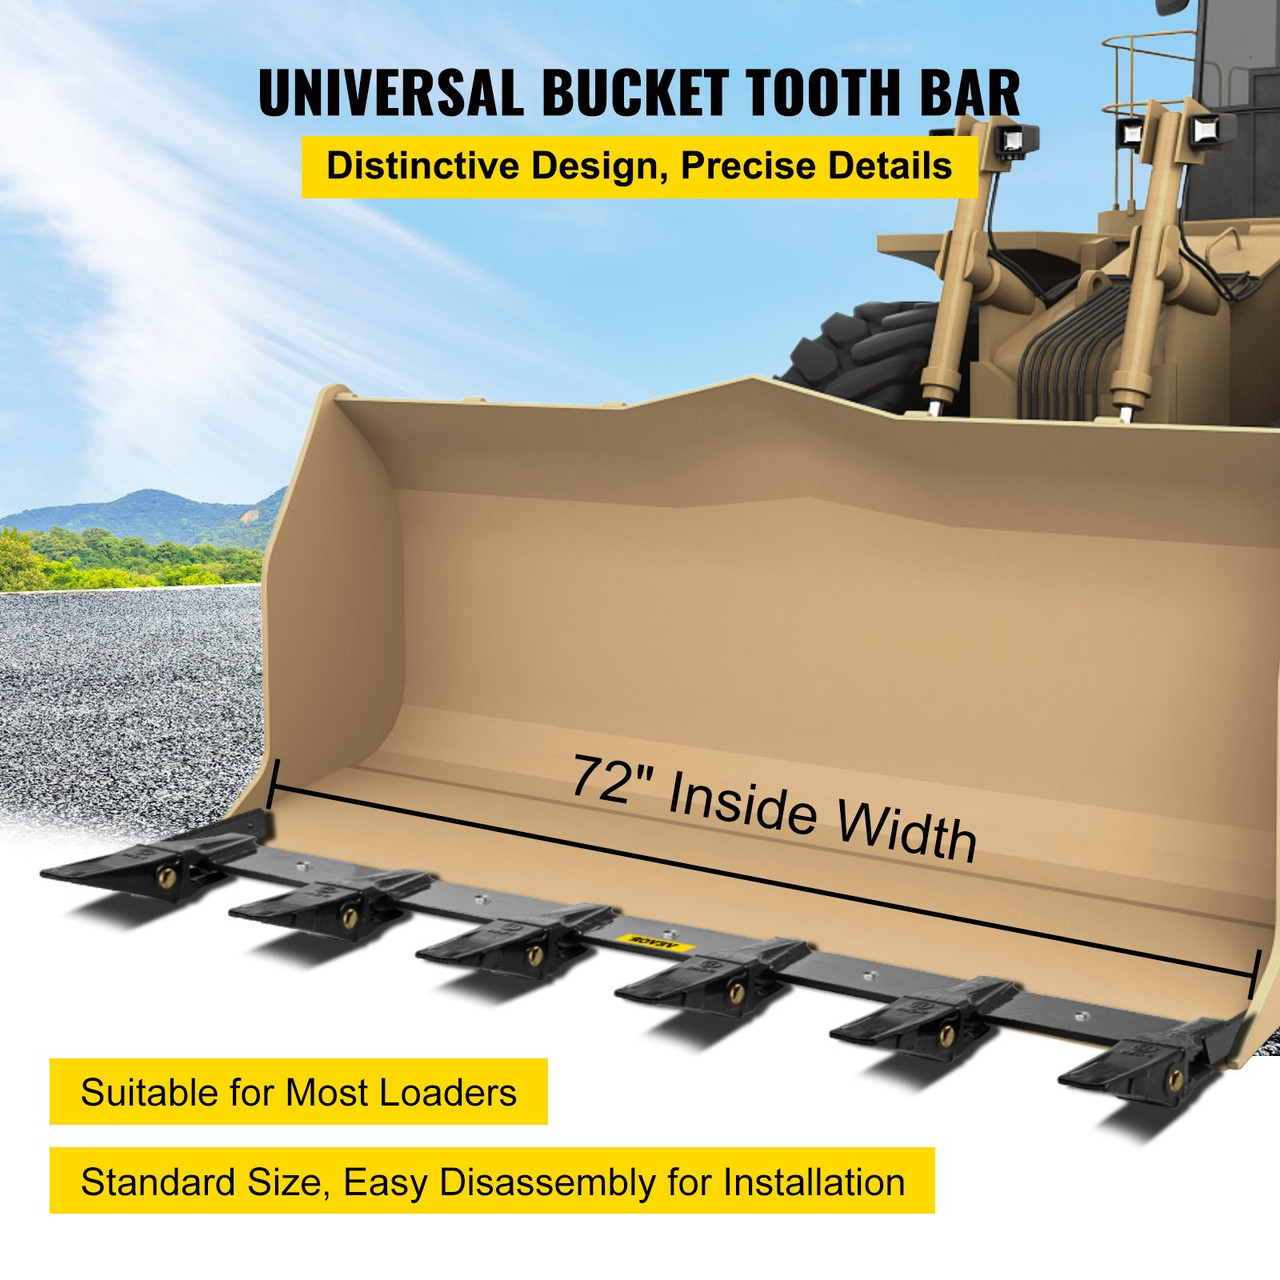 Bucket Tooth Bar, 48'' Inside Bucket Width Tractor Bucket Teeth, 9.84'' Teeth Space Tooth Bar for Loader Bucket 23TF, Bolt on Tooth Bucket Enables Penetration of Compacted Soil